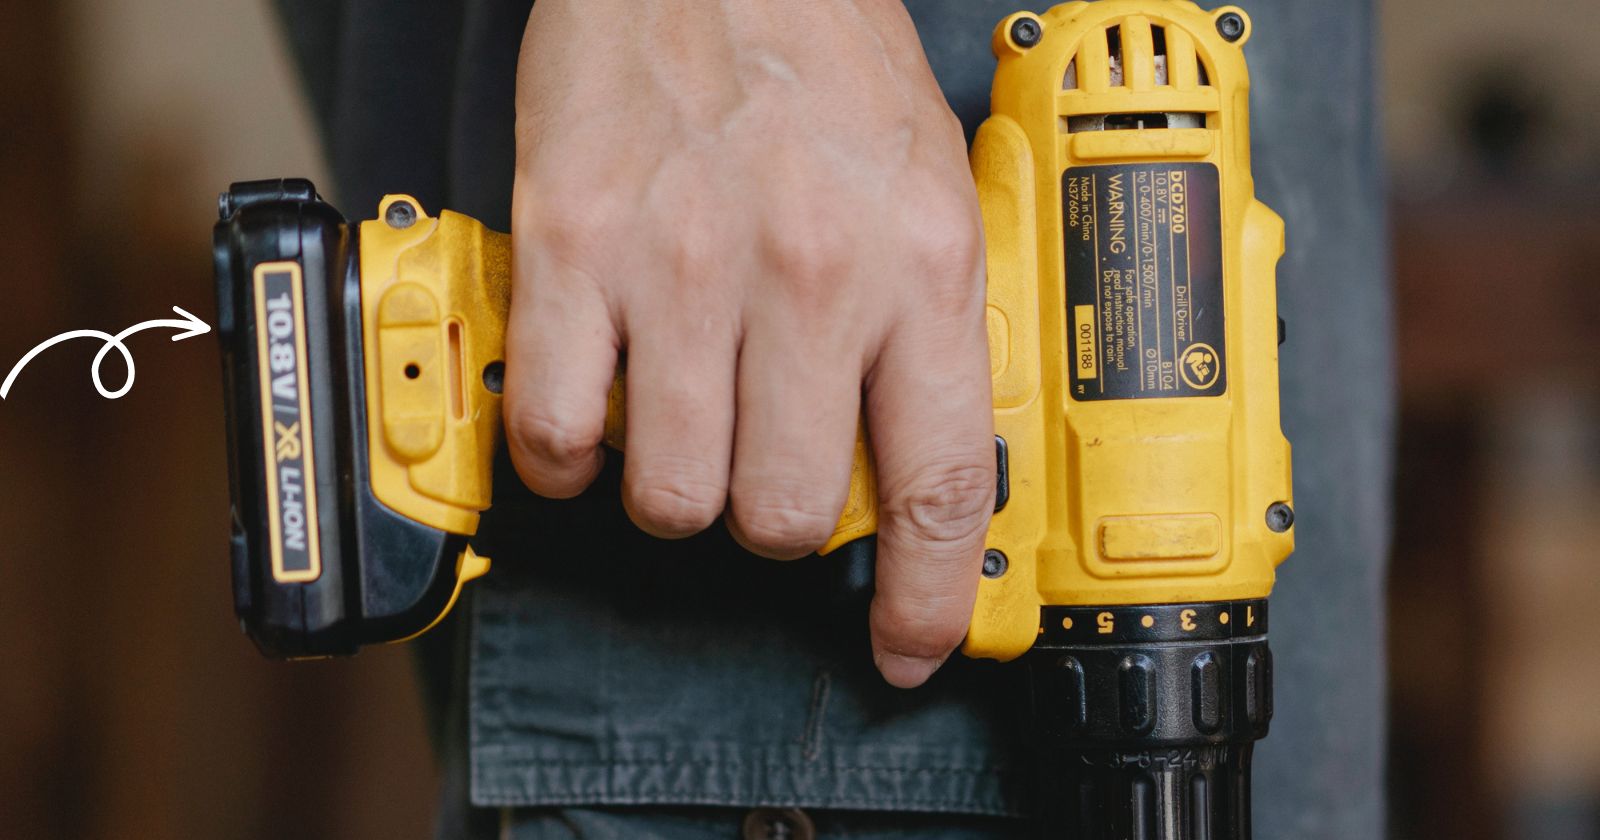 How To Properly Charge A Battery For A Impact Driver